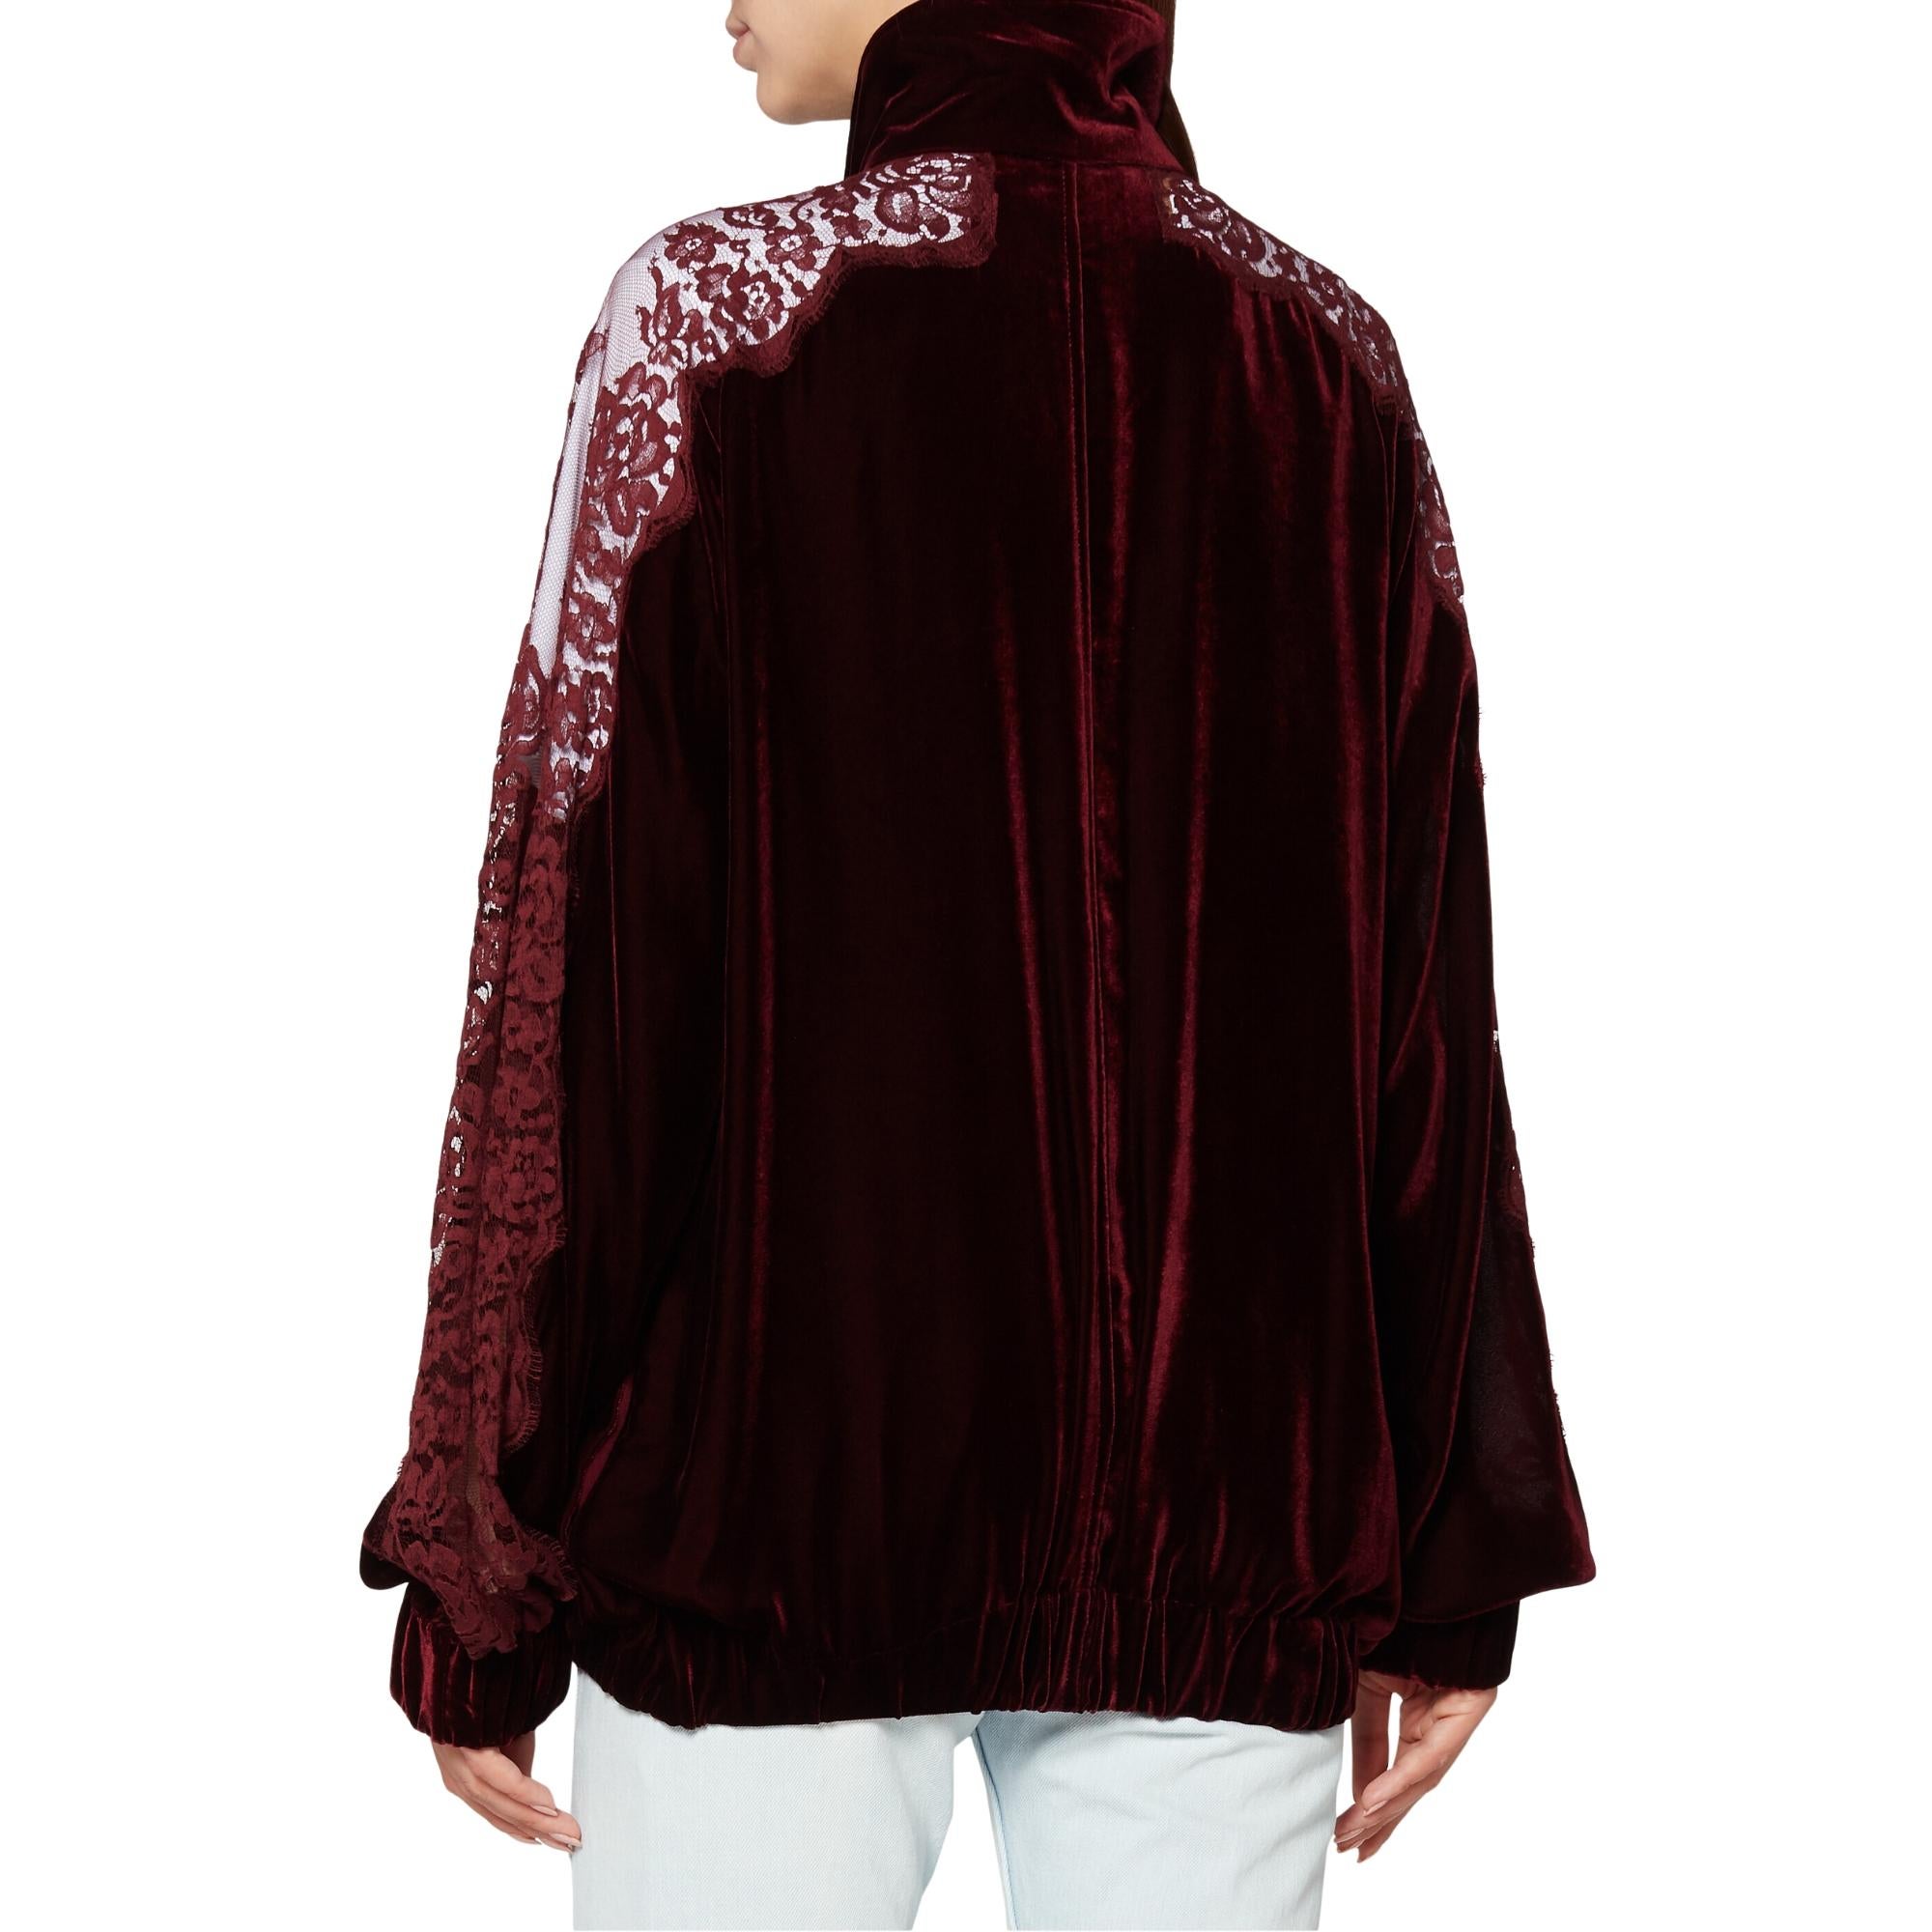 Stella McCartney Jacket. Burgundy. Stand Collar. Slit Pockets & Zip Closure.


Color: Burgundy
Material: 67% Viscose, 33% Cupro; Lining 100% Silk; Combo 75% Cotton, 25% Polyamide
Condition: Excellent
Size: US2, IT38


Measurements
Bust: